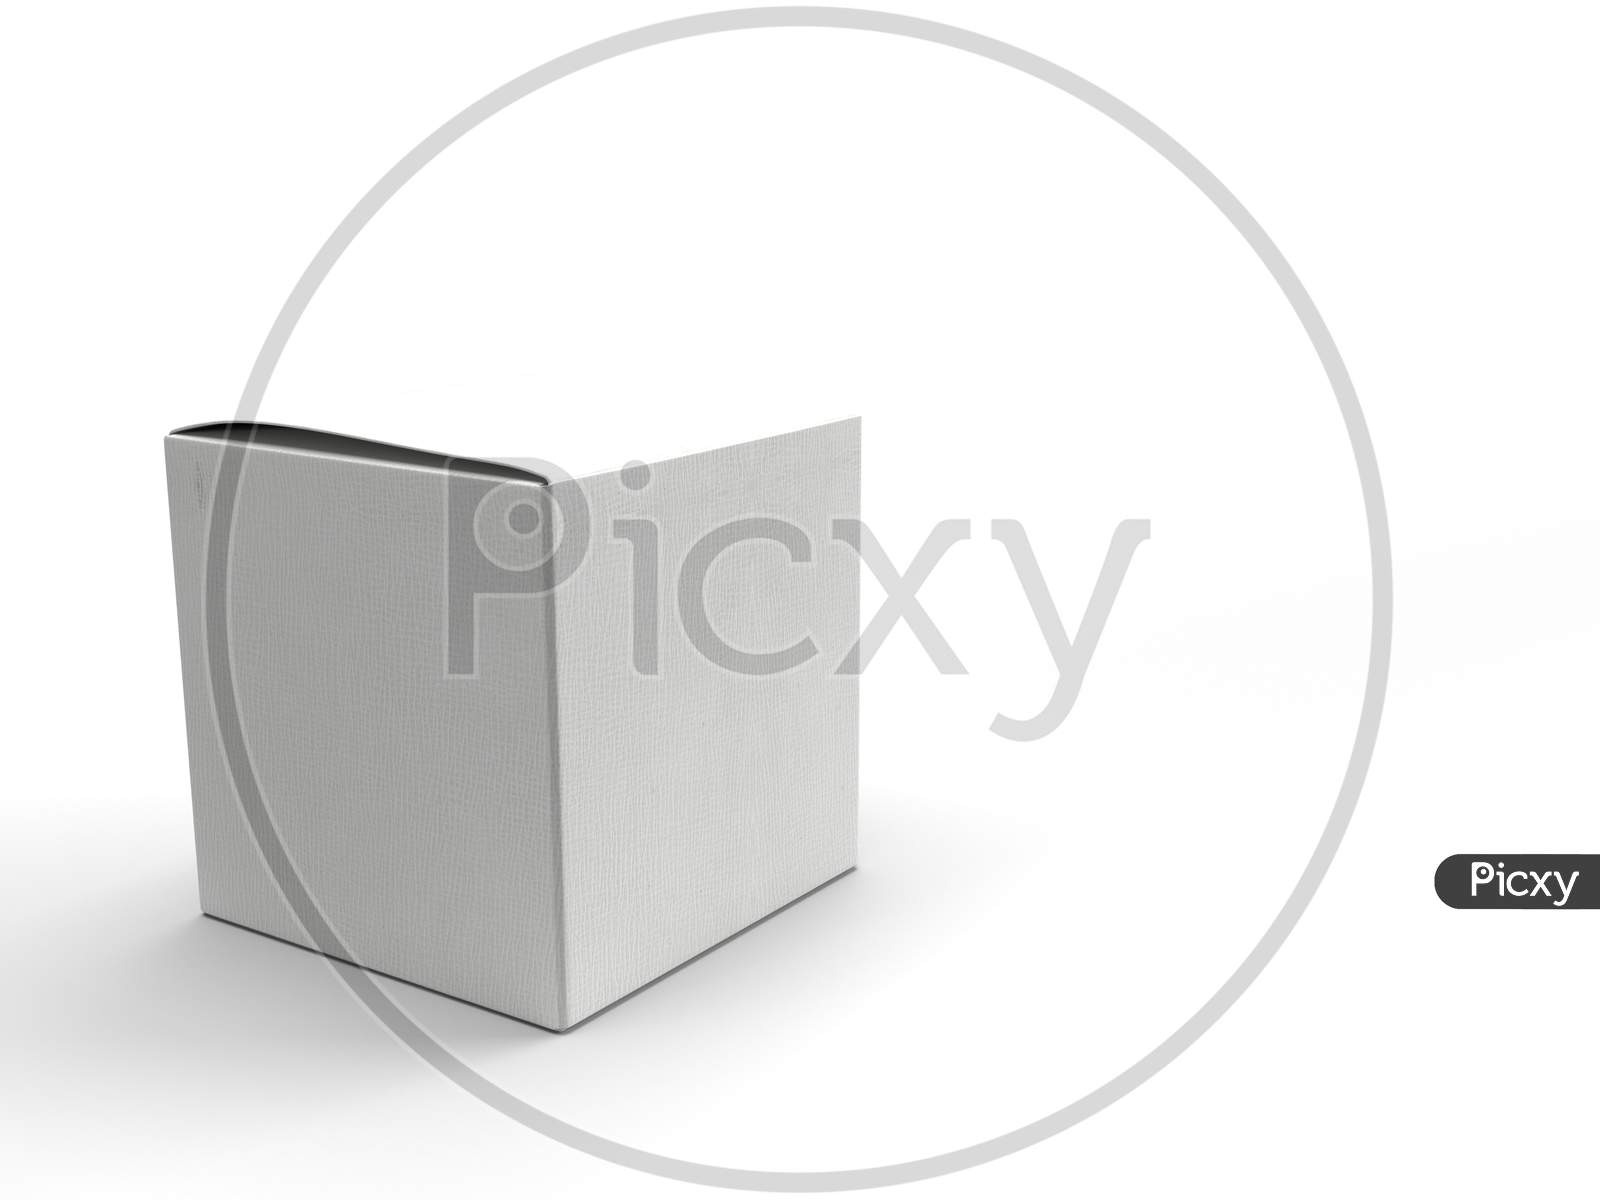 3D Render Of A White Cardboard Box For Blank Packaging Product Mockup In White Background.